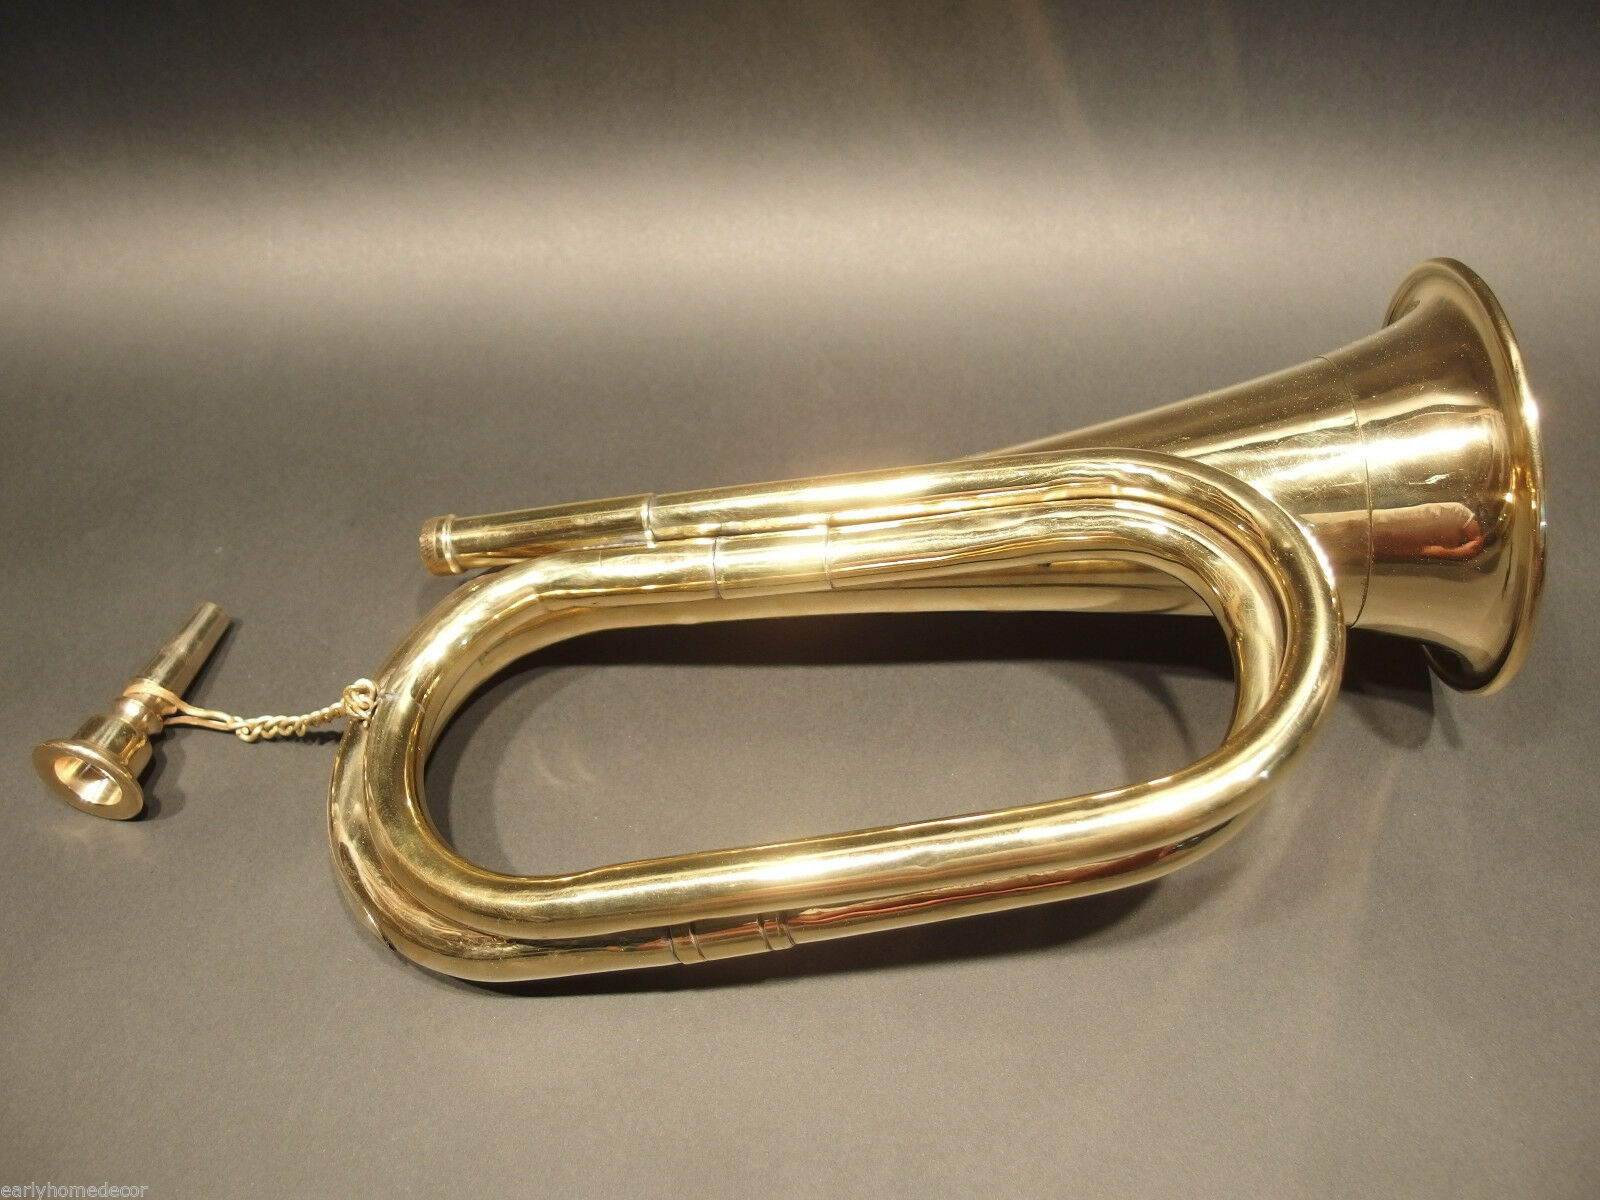 Antique Style US Military Civil War Brass Bugle Horn - Early Home Decor